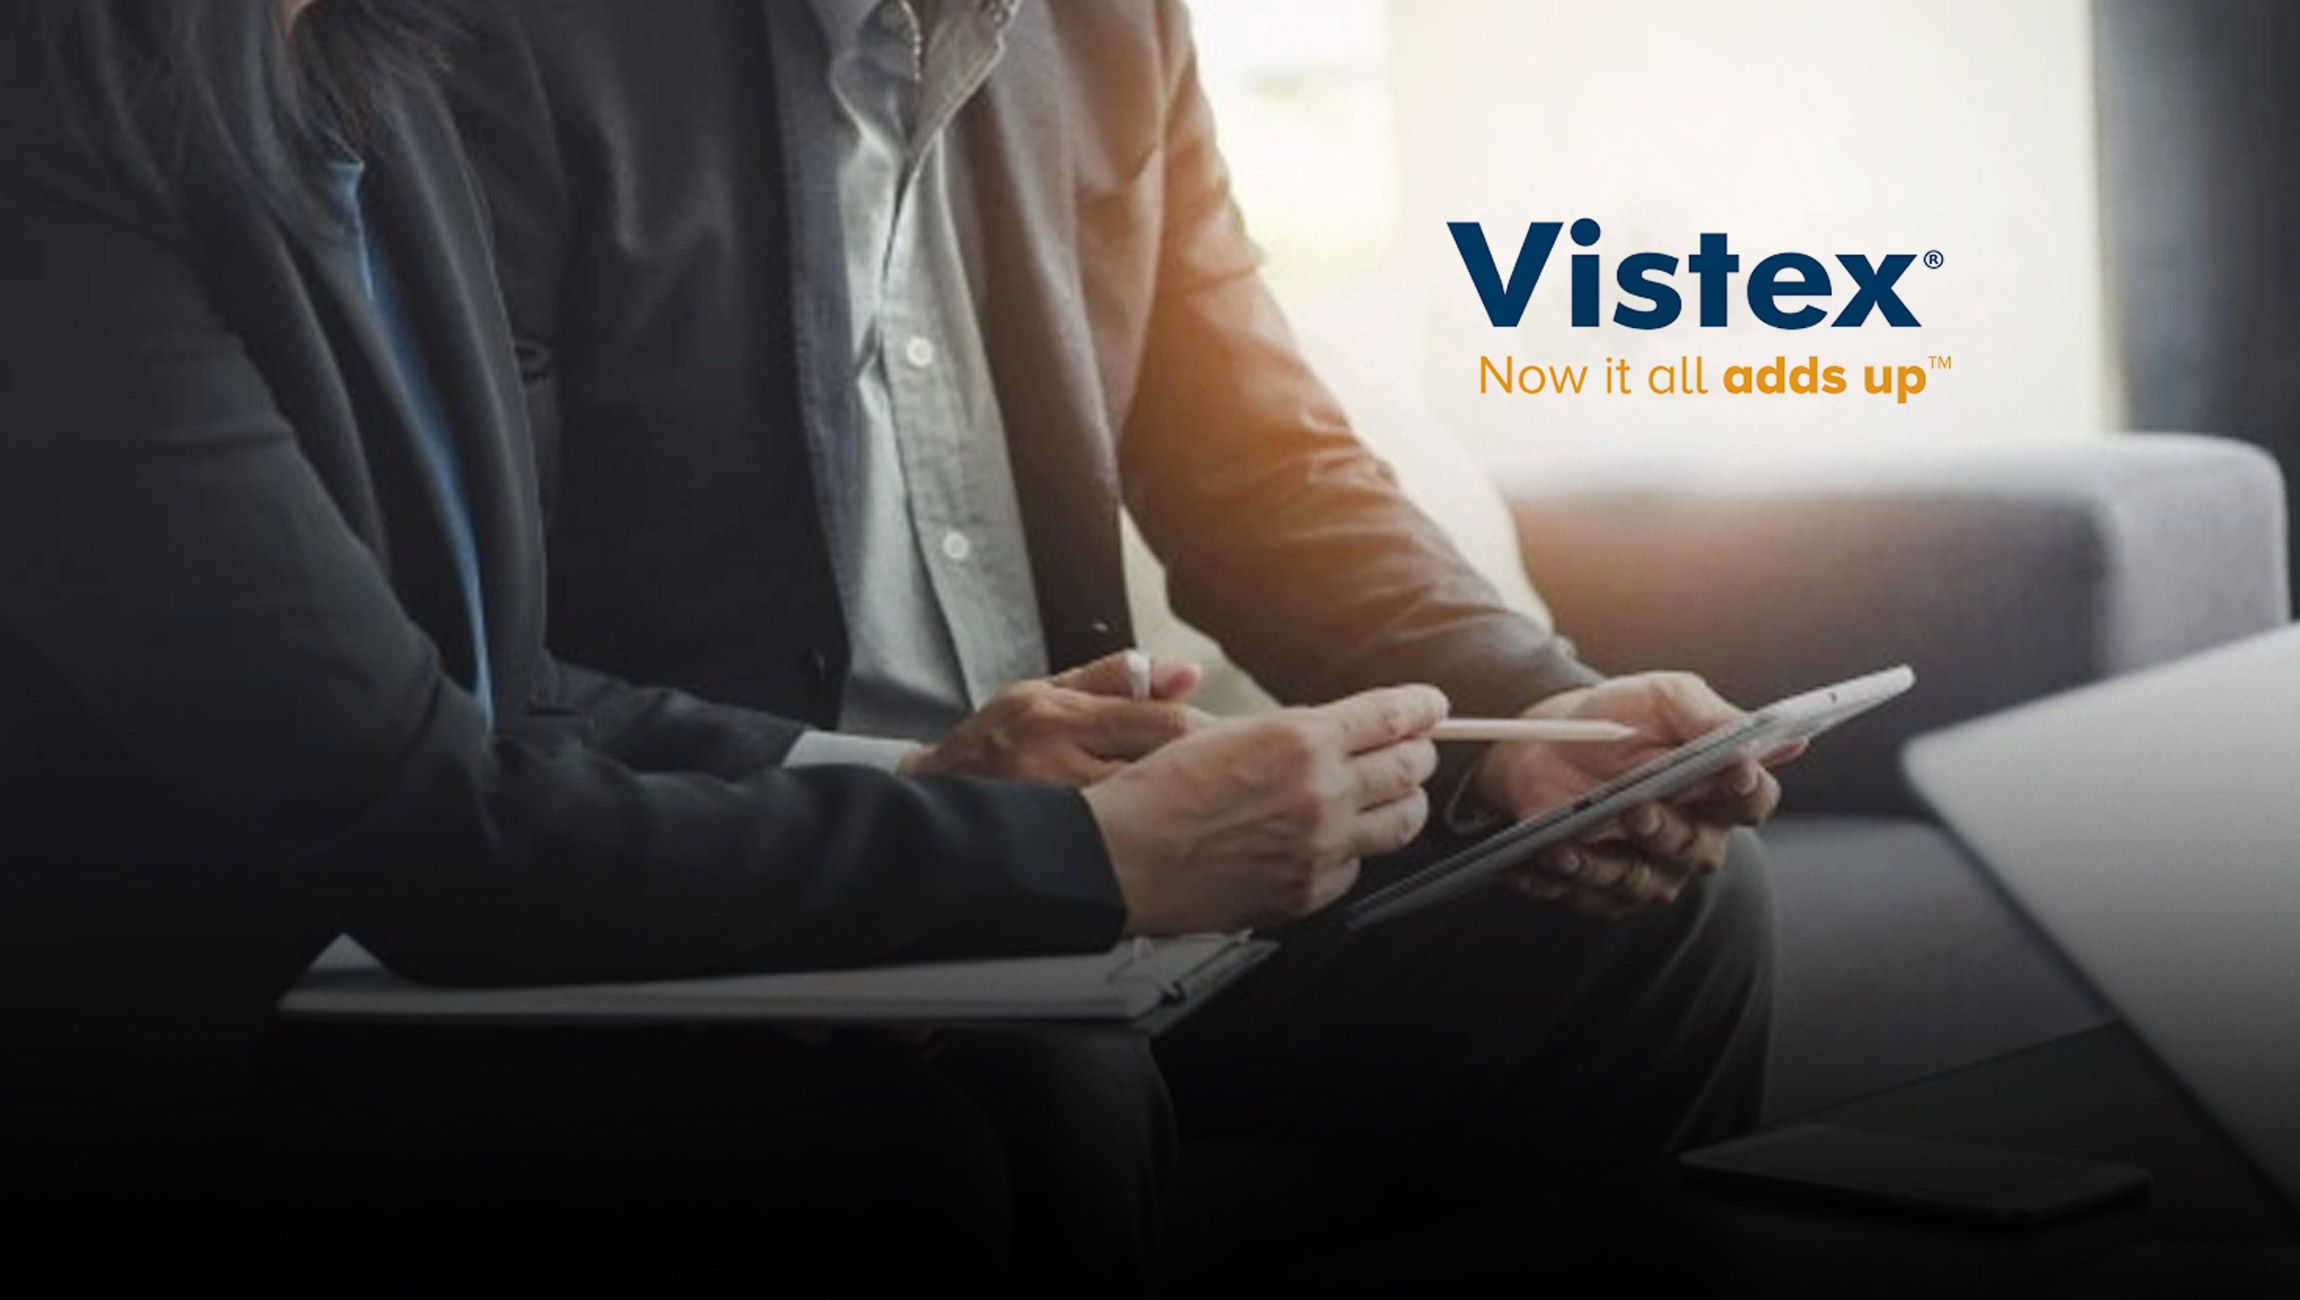 Vistex Achieves POI Best-in-class 2021: Foodservice, HQ Planning And Dashboards